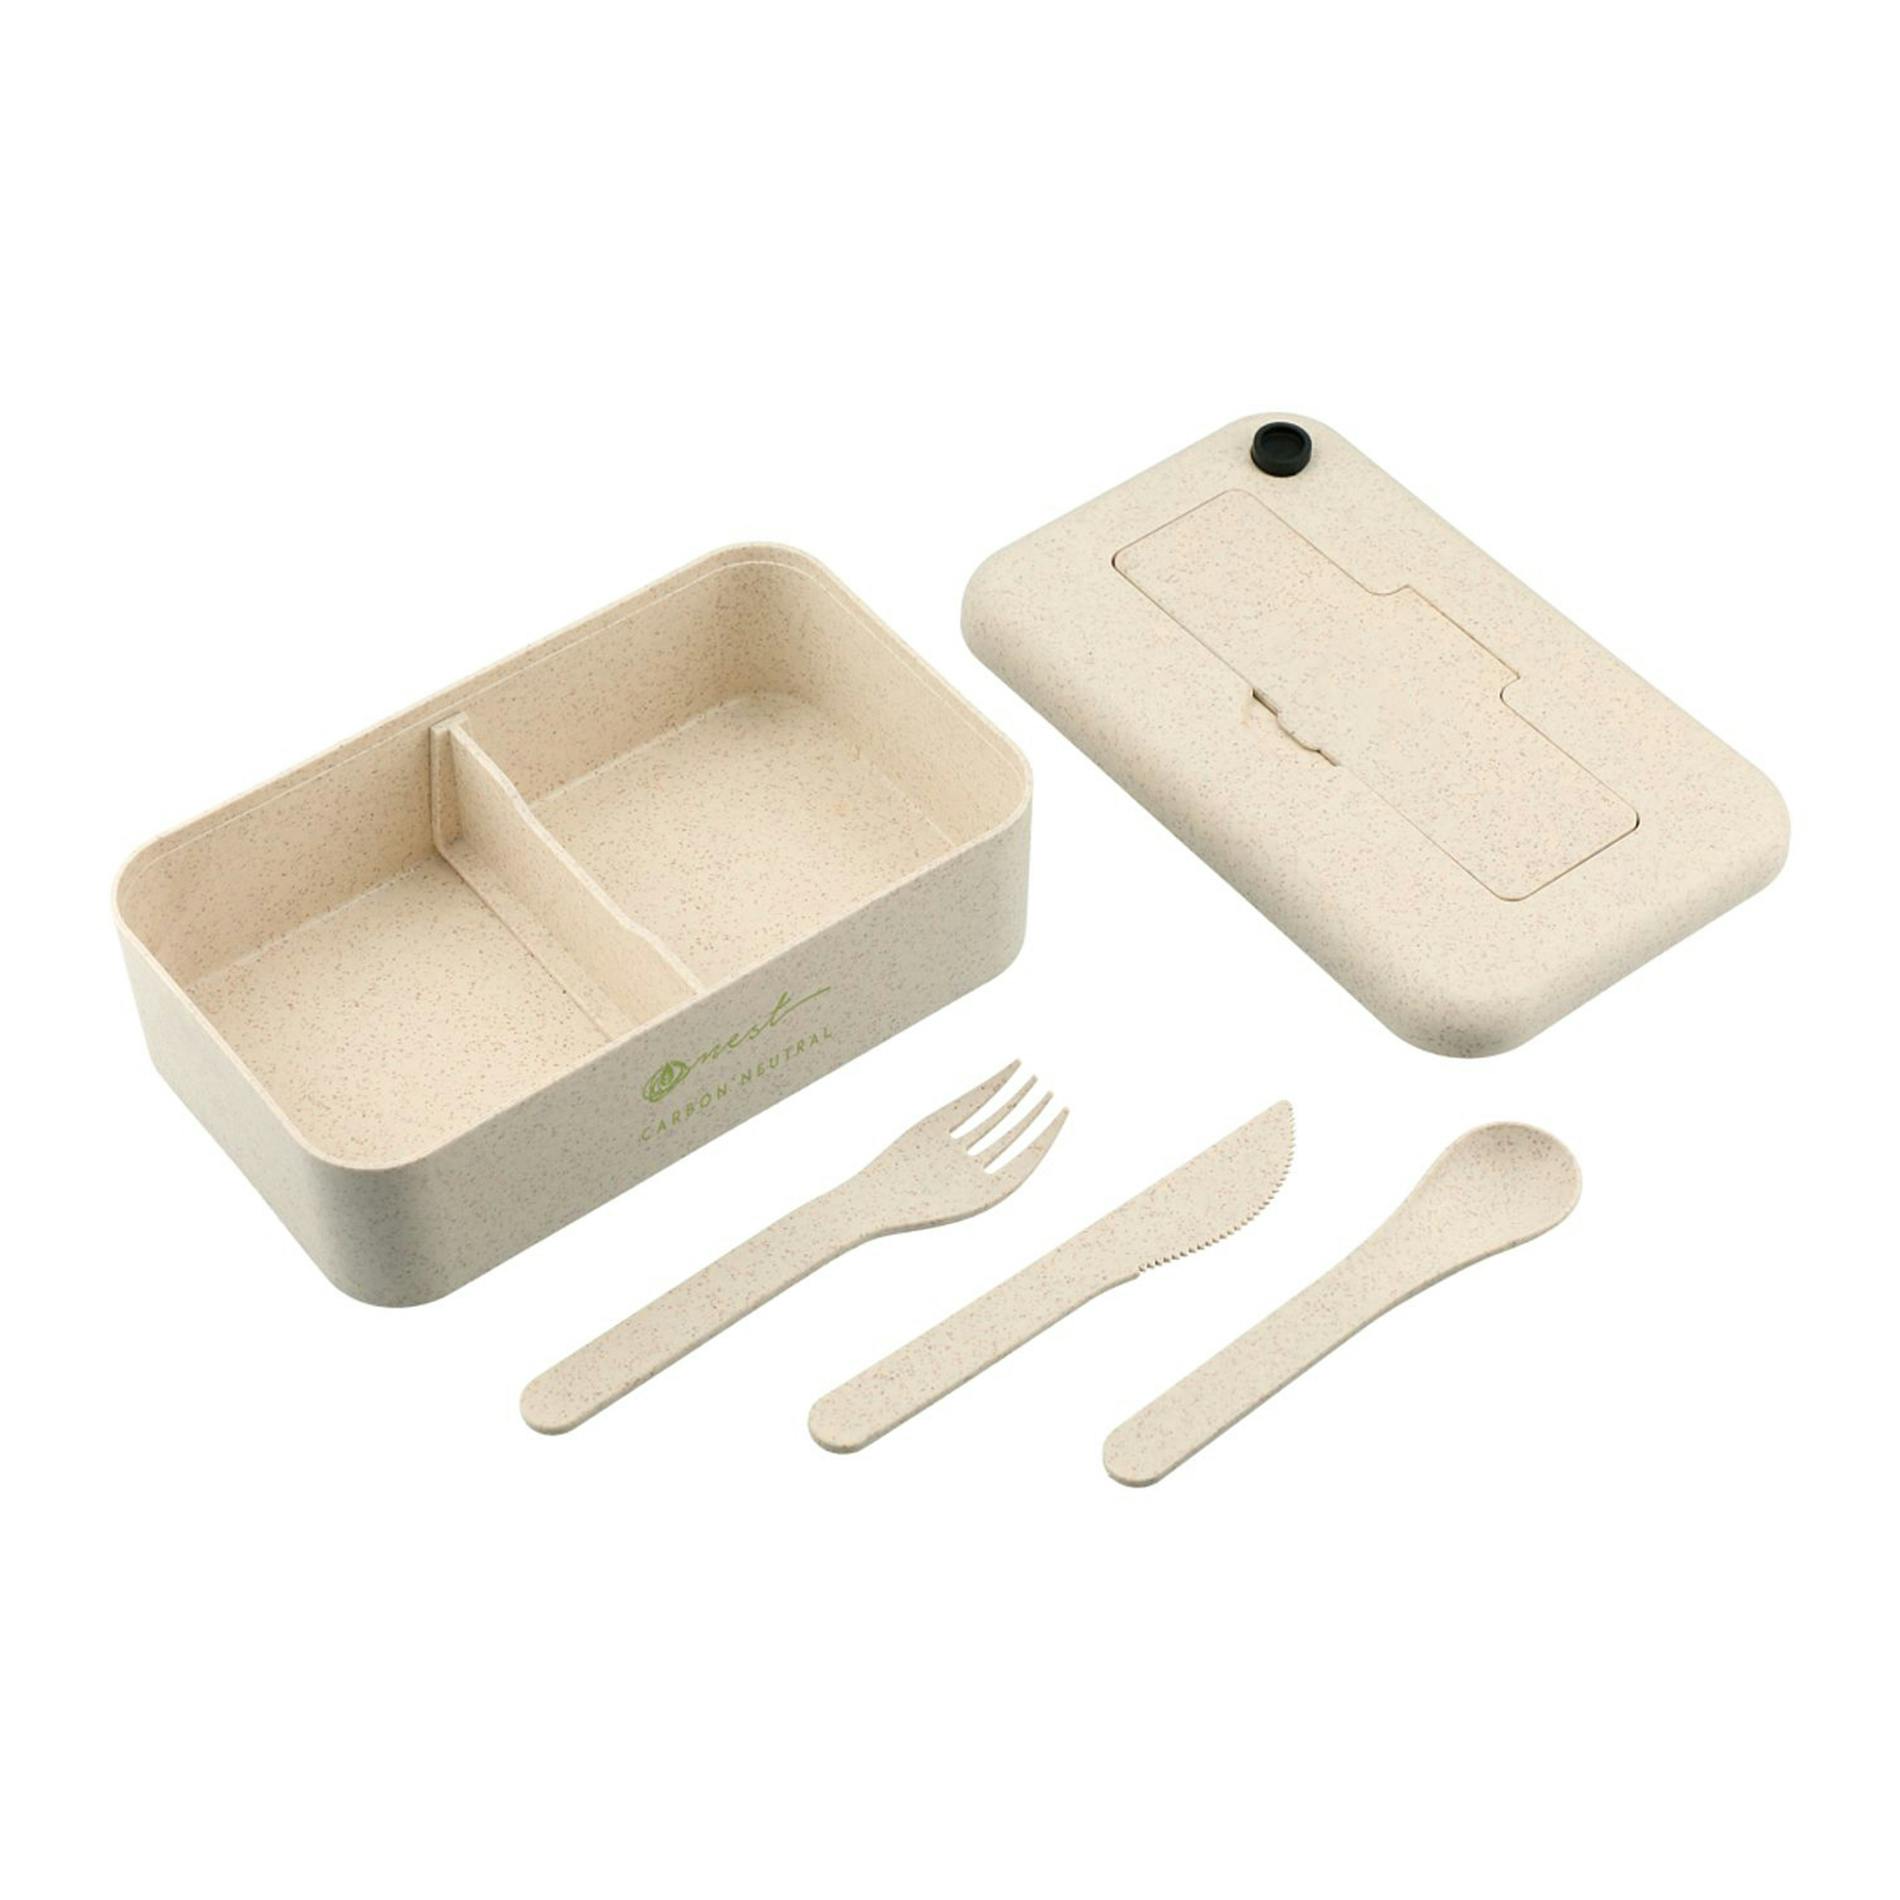 Bamboo Fiber Lunch Box with Utensils - additional Image 3